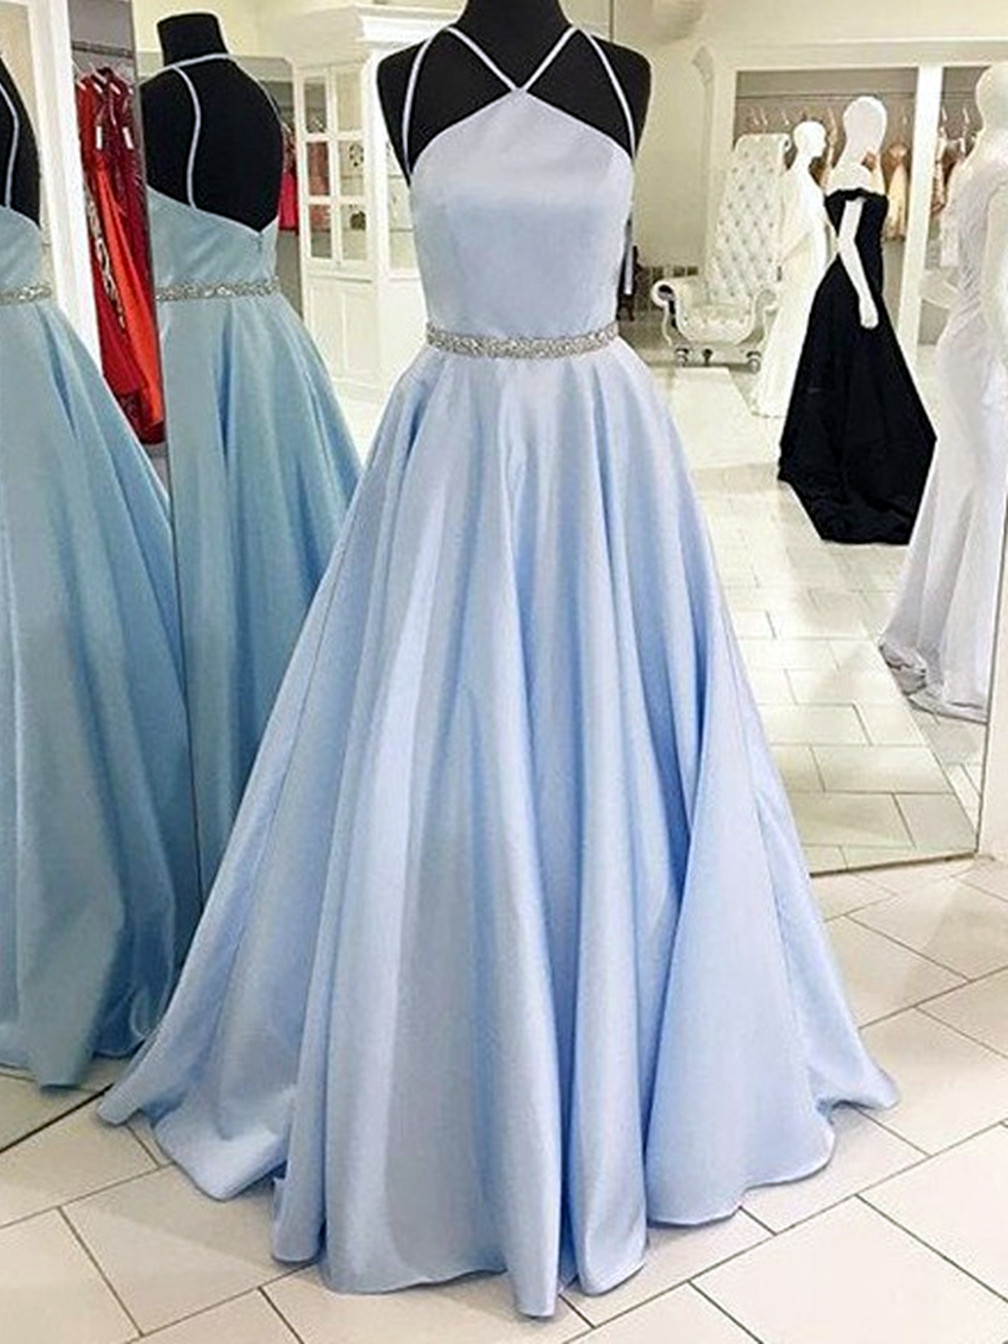 Women A-line/princess Satin Prom Dresses Long Halter Evening Party Gowns Sleeveless Formal Dress Yp035